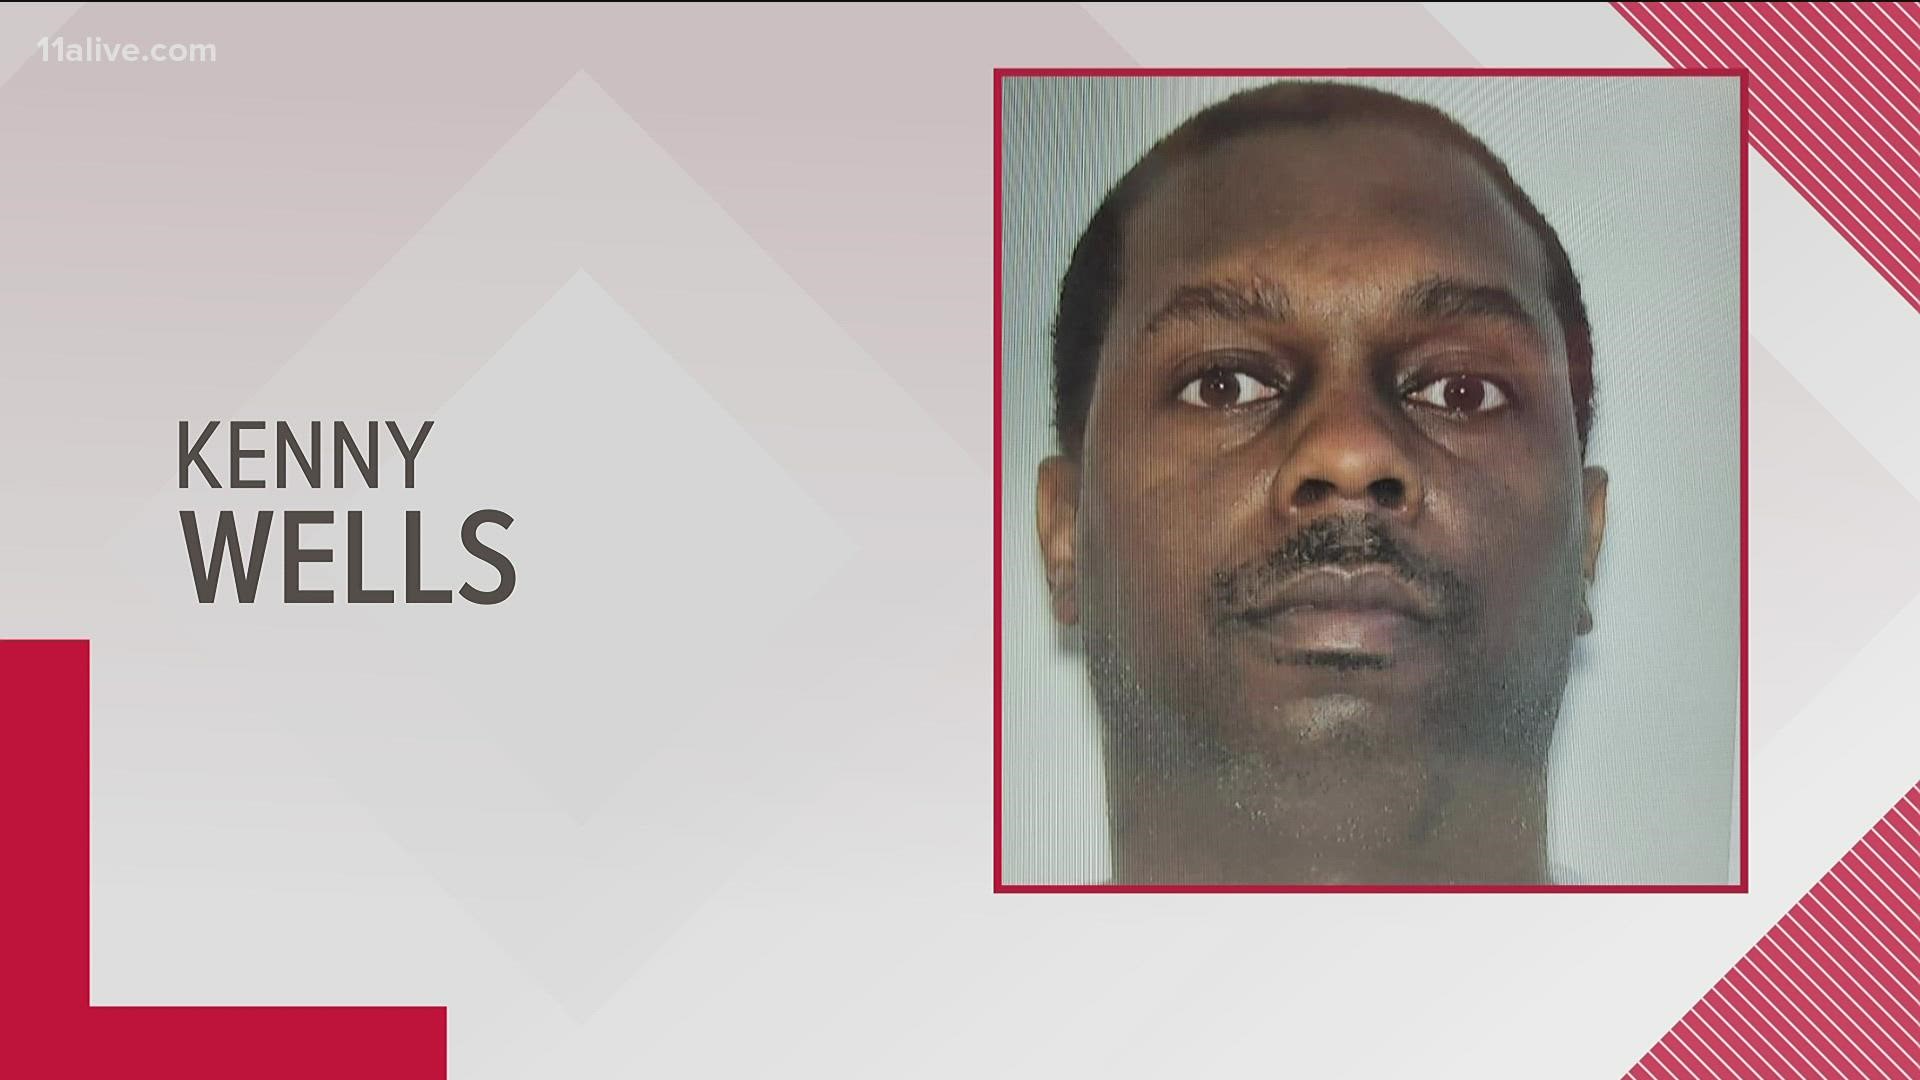 Atlanta Police identified Kenny Wells, 42, as the passenger who fled after his gun discharged at Hartsfield-Jackson International Airport on Nov. 20.